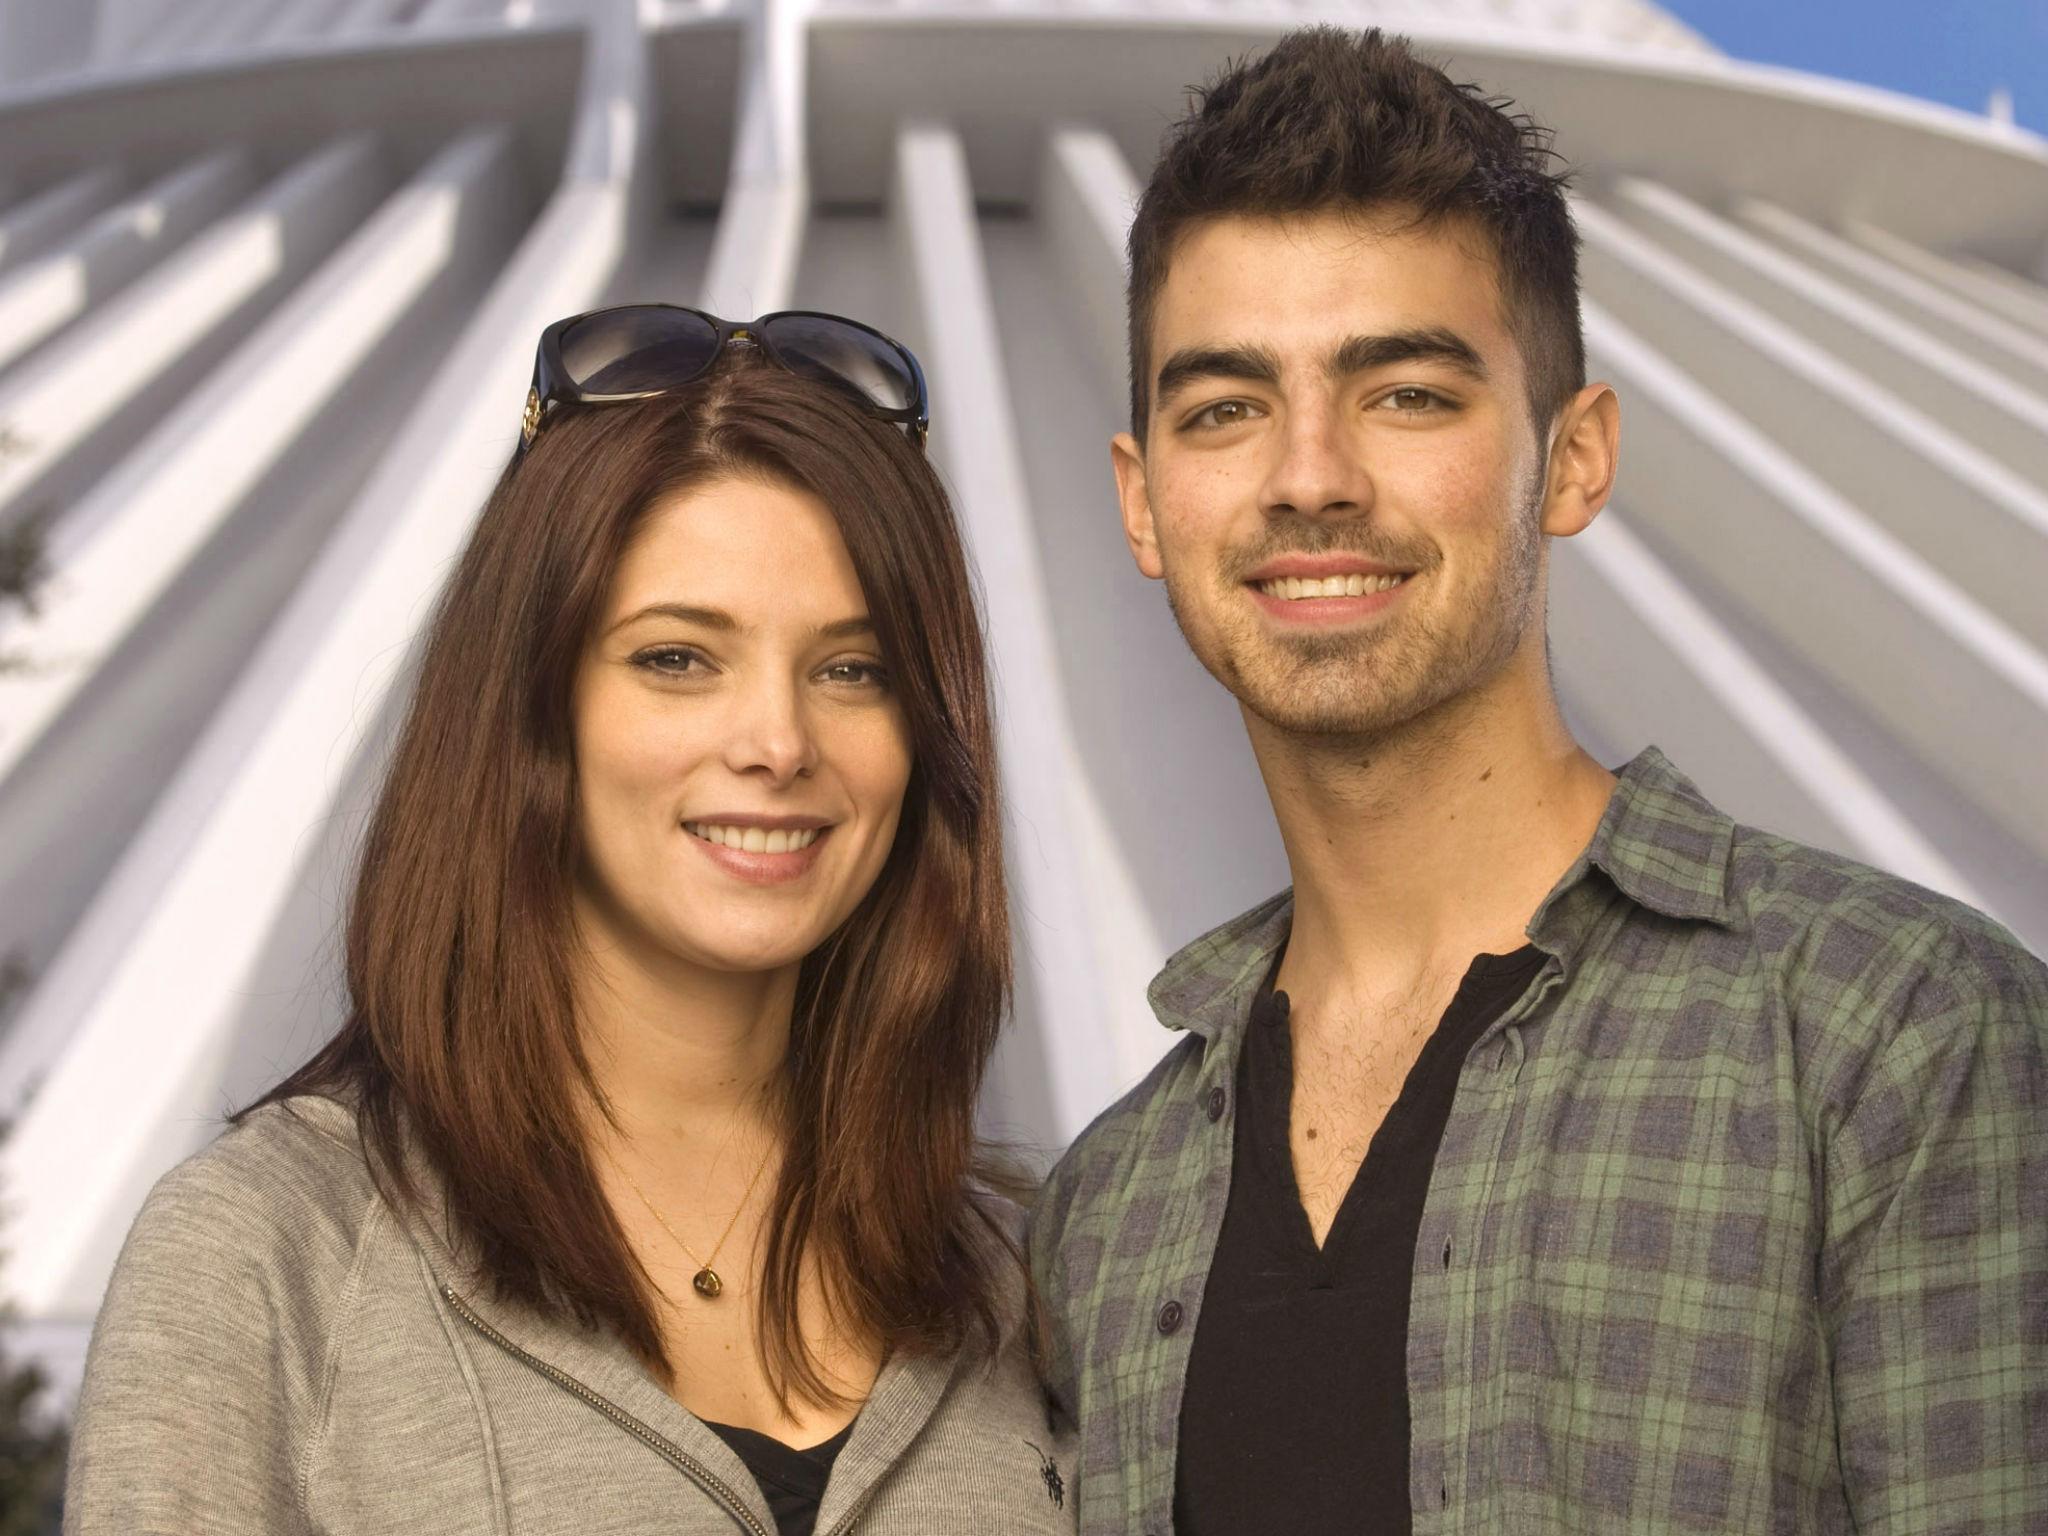 Ashley Greene signals she isnt pleased with Joe Jonas for saying he lost his virginity to her The Independent The Independent photo pic